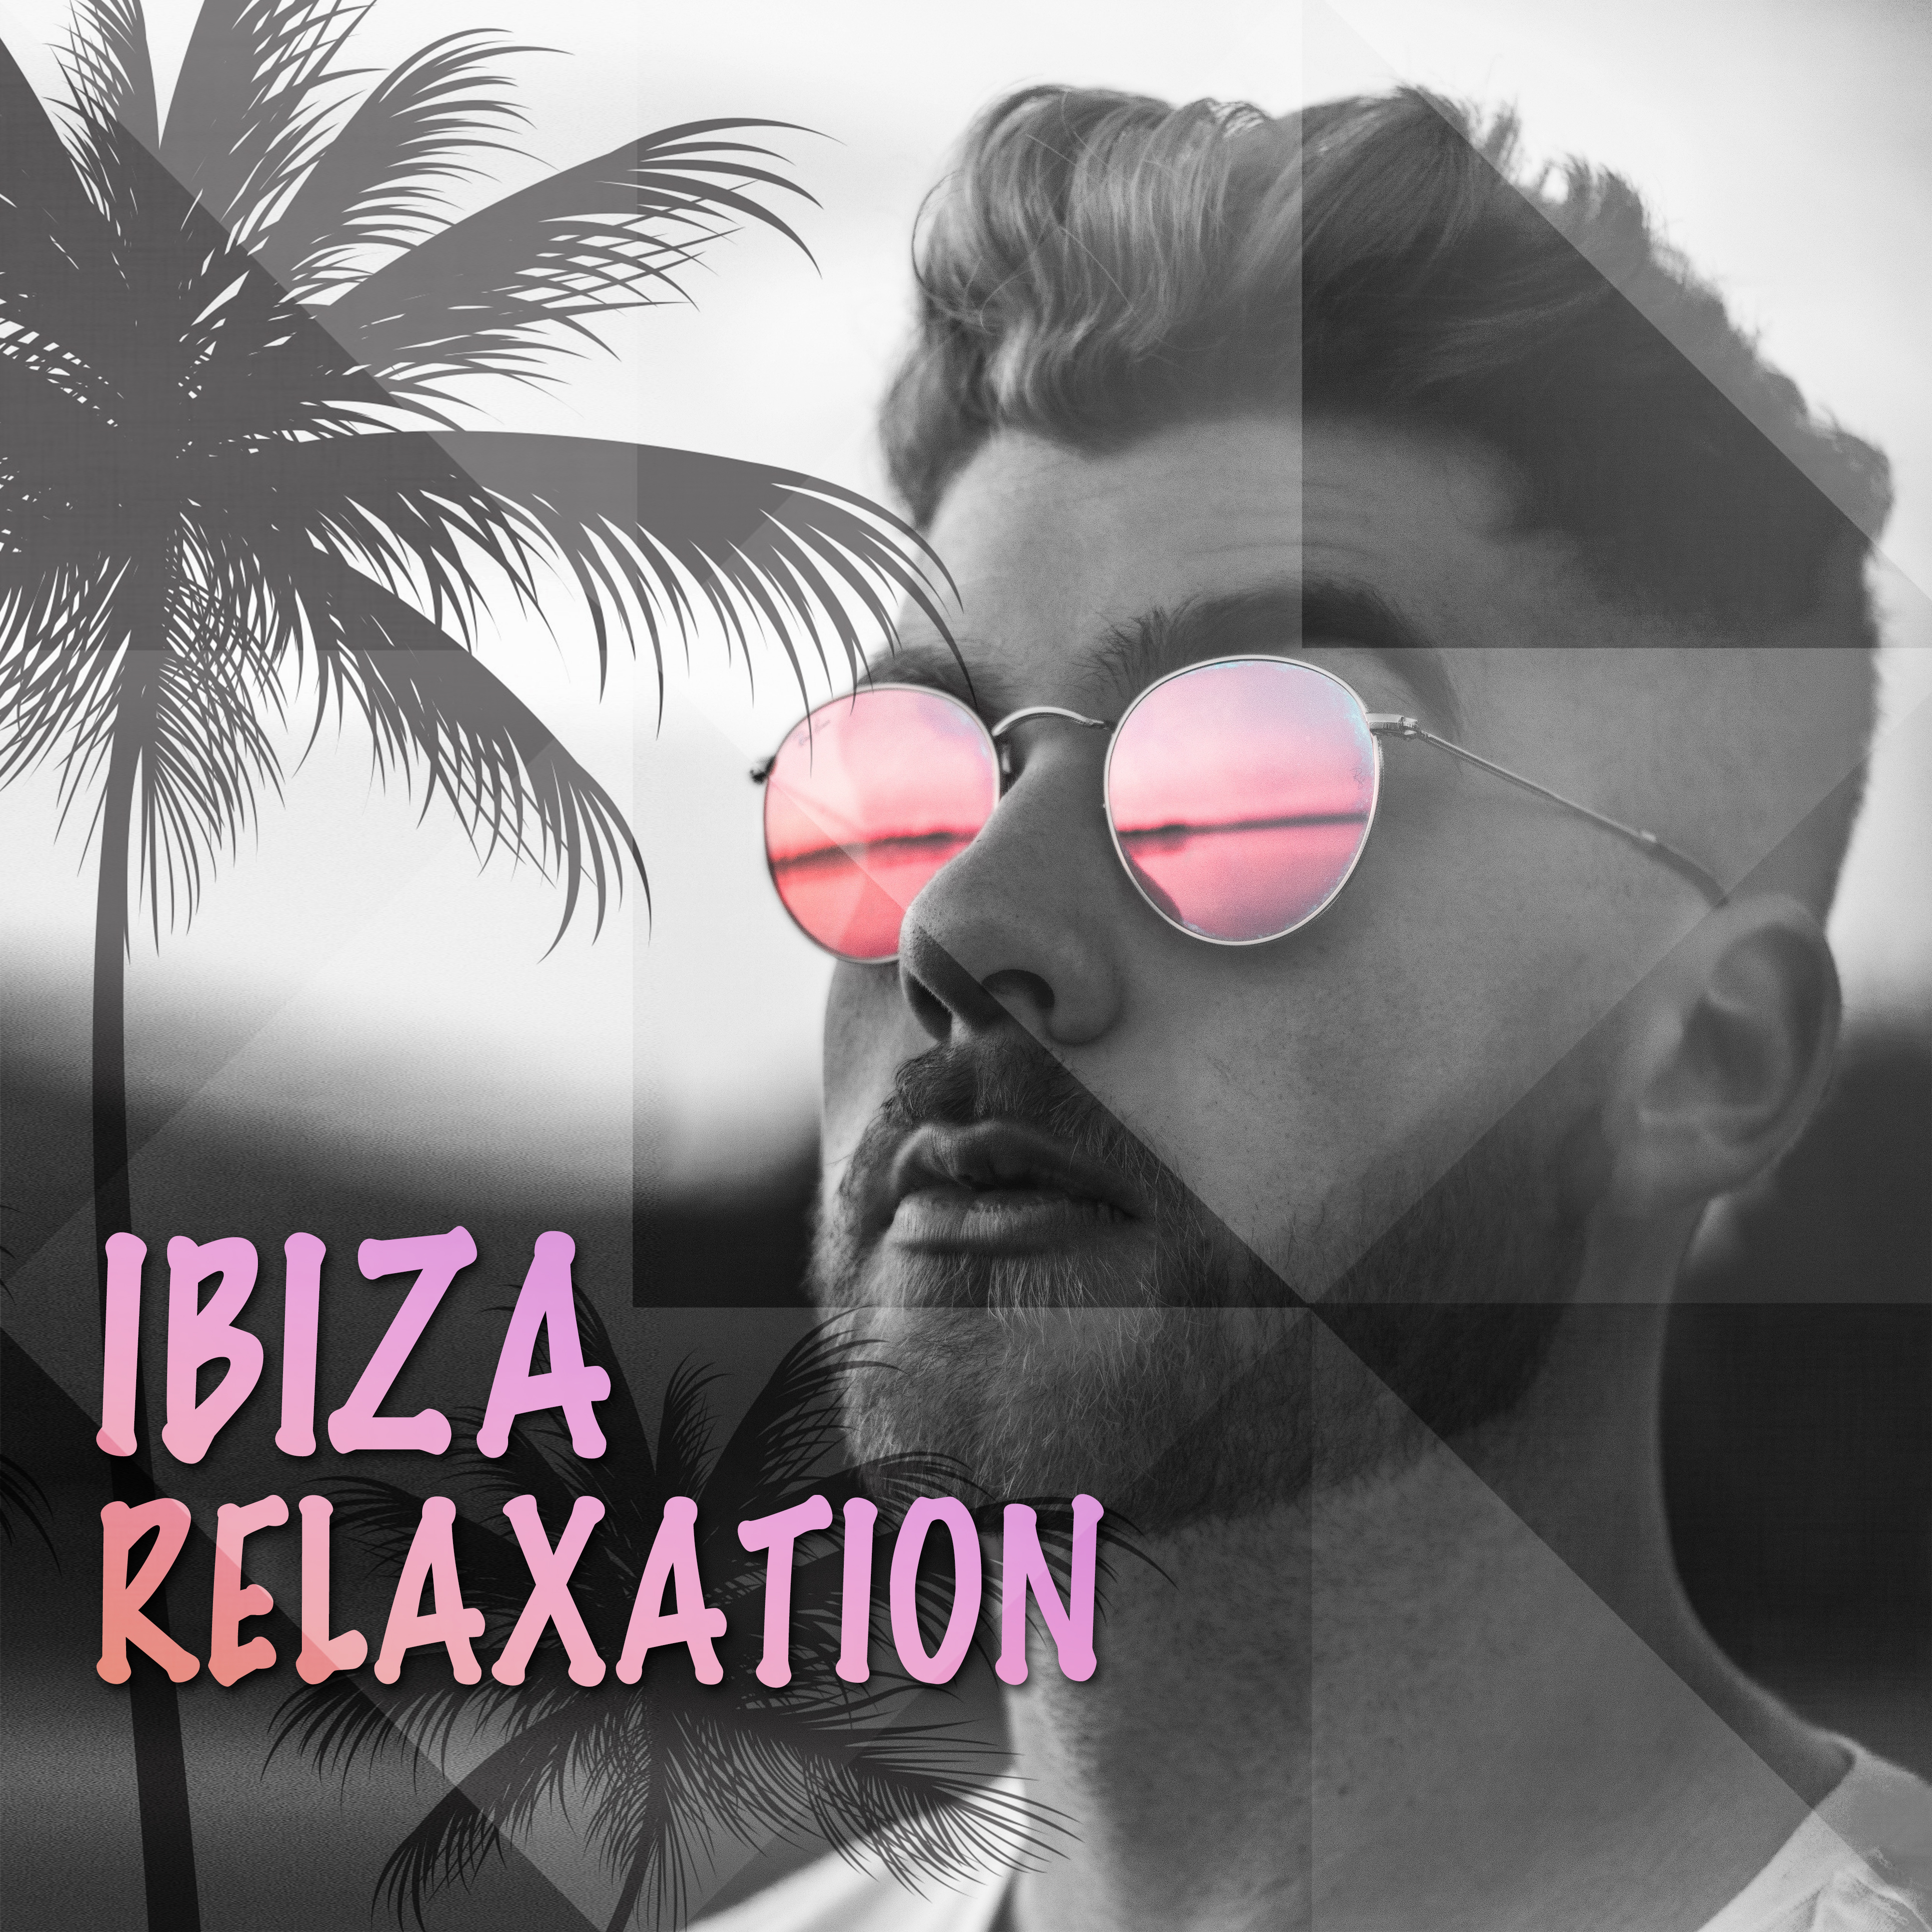 Ibiza Relaxation – Peaceful Chill Out Music, Stress Relief, Relax, Summer Vibes, Beach Chill, Rest on the Beach, Tranquility